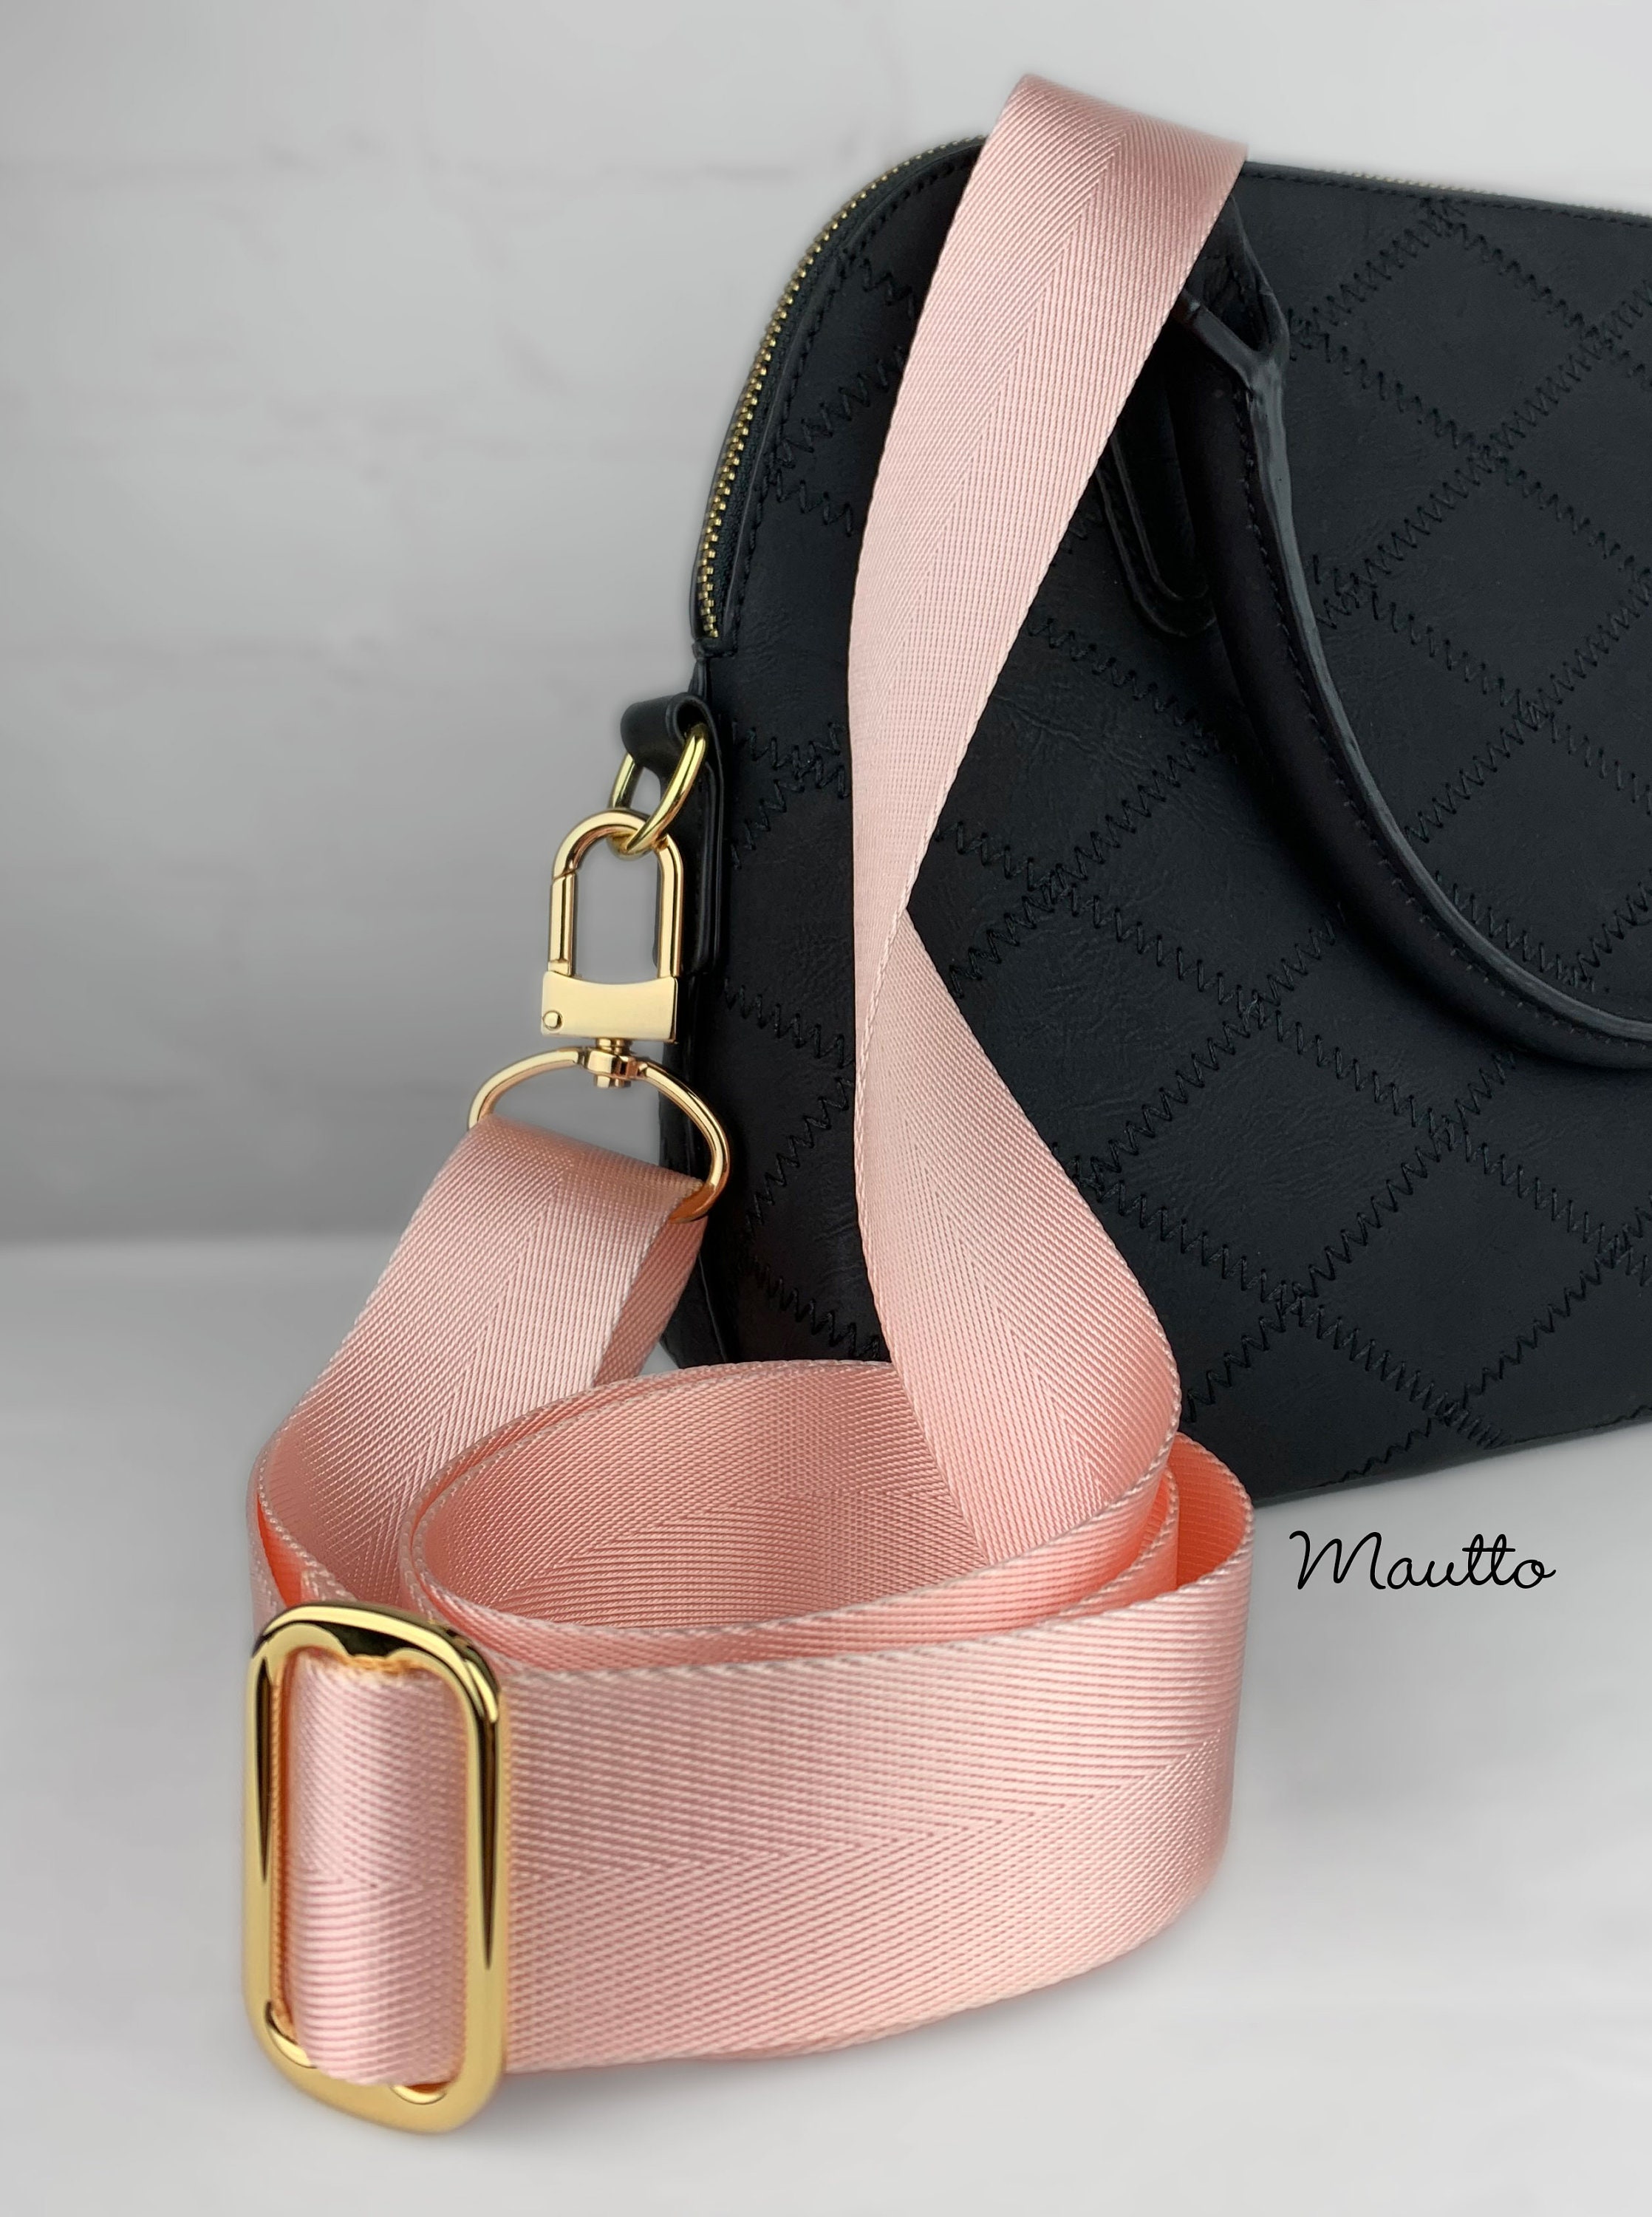 Short Shoulder Strap or Handle 20 inch Length 0.75 inch Wide Leather Purse/bag  Strap Choose Leather and Connector Style 